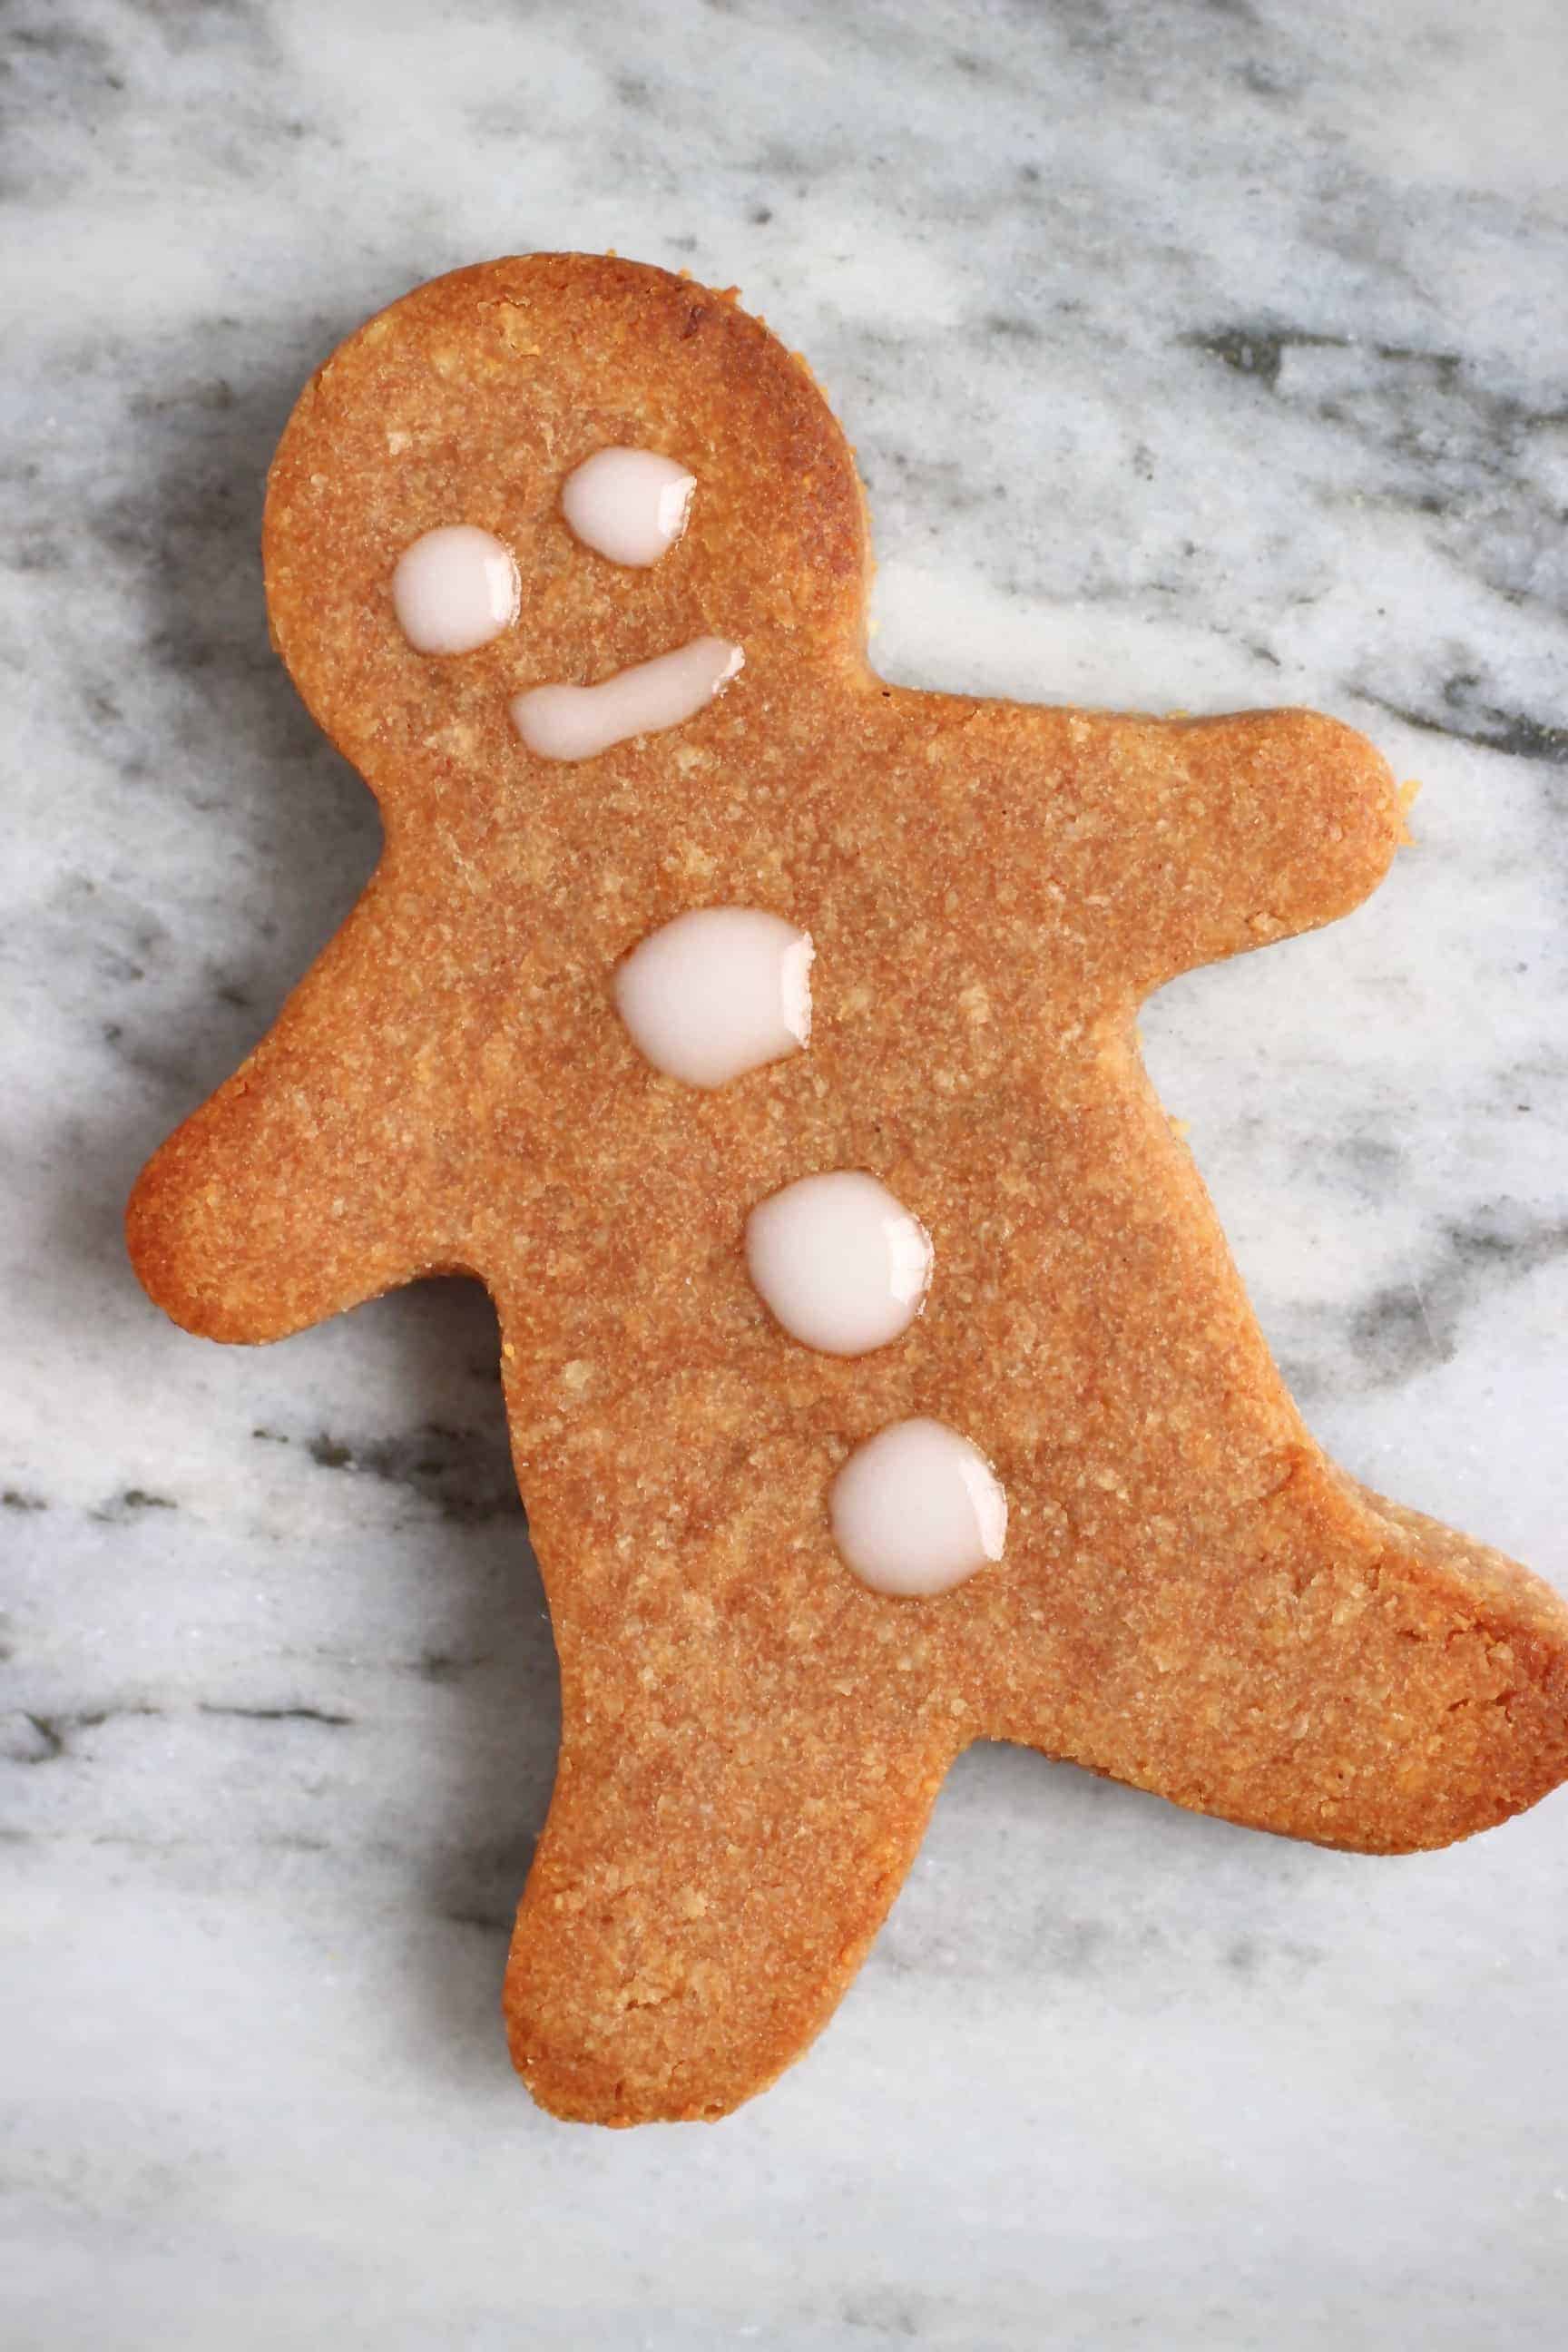 A gluten-free vegan gingerbread man cookie with an icing face against a marble background